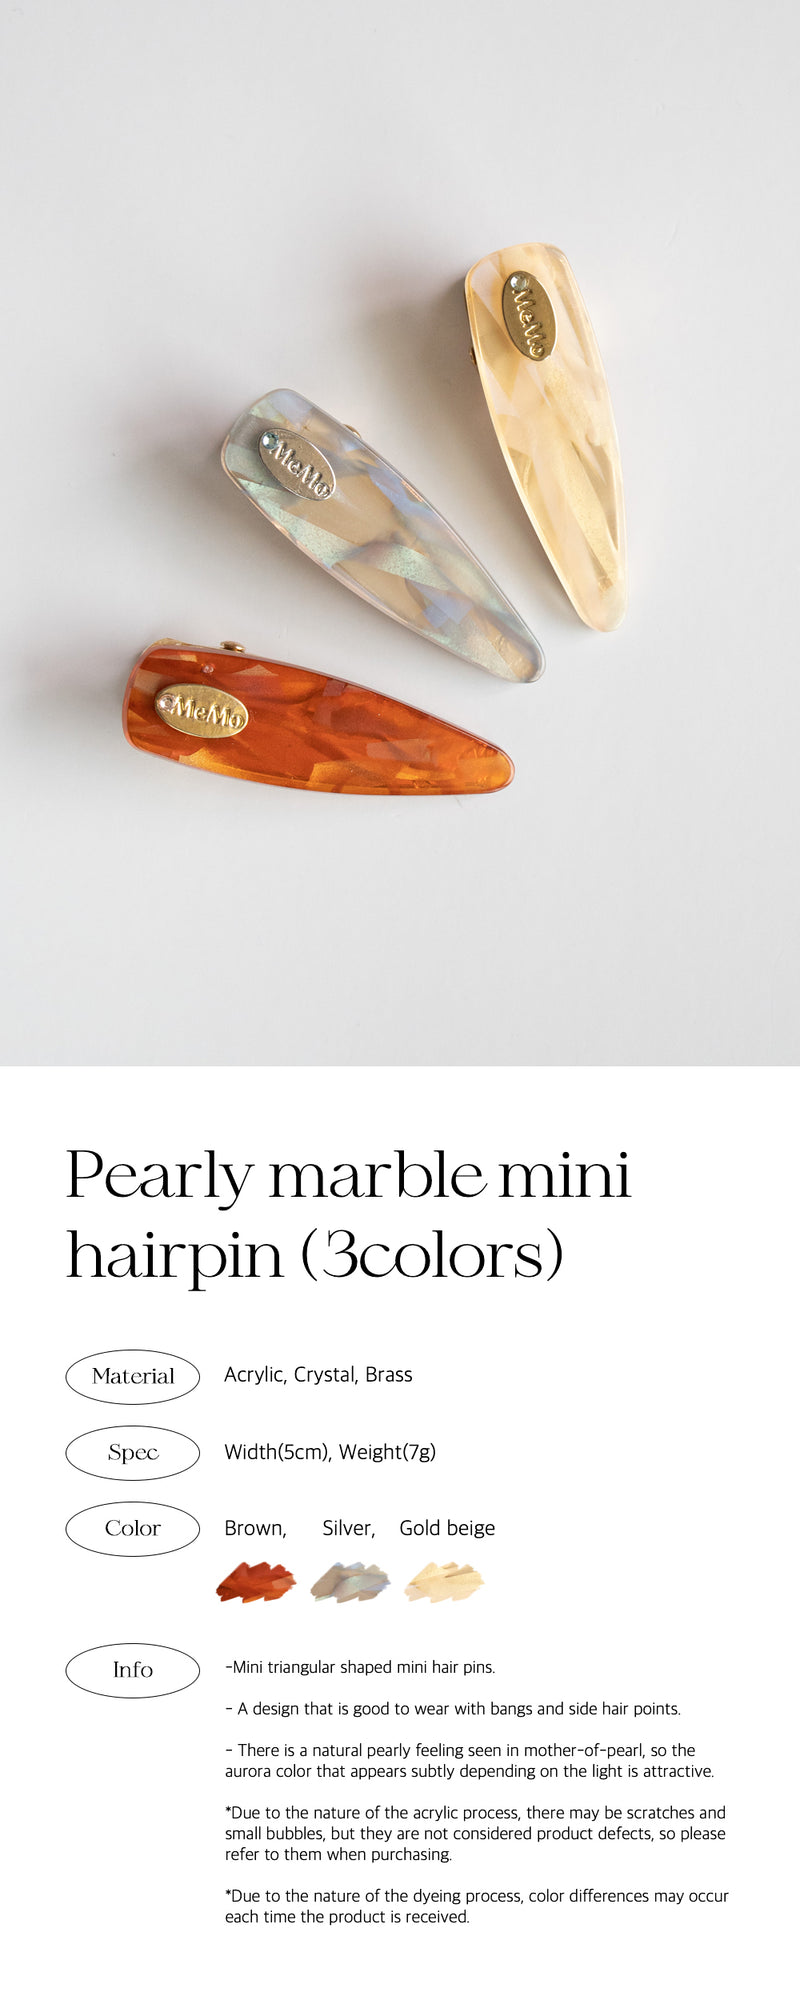 Pearly marble mini hairpin (3colors)